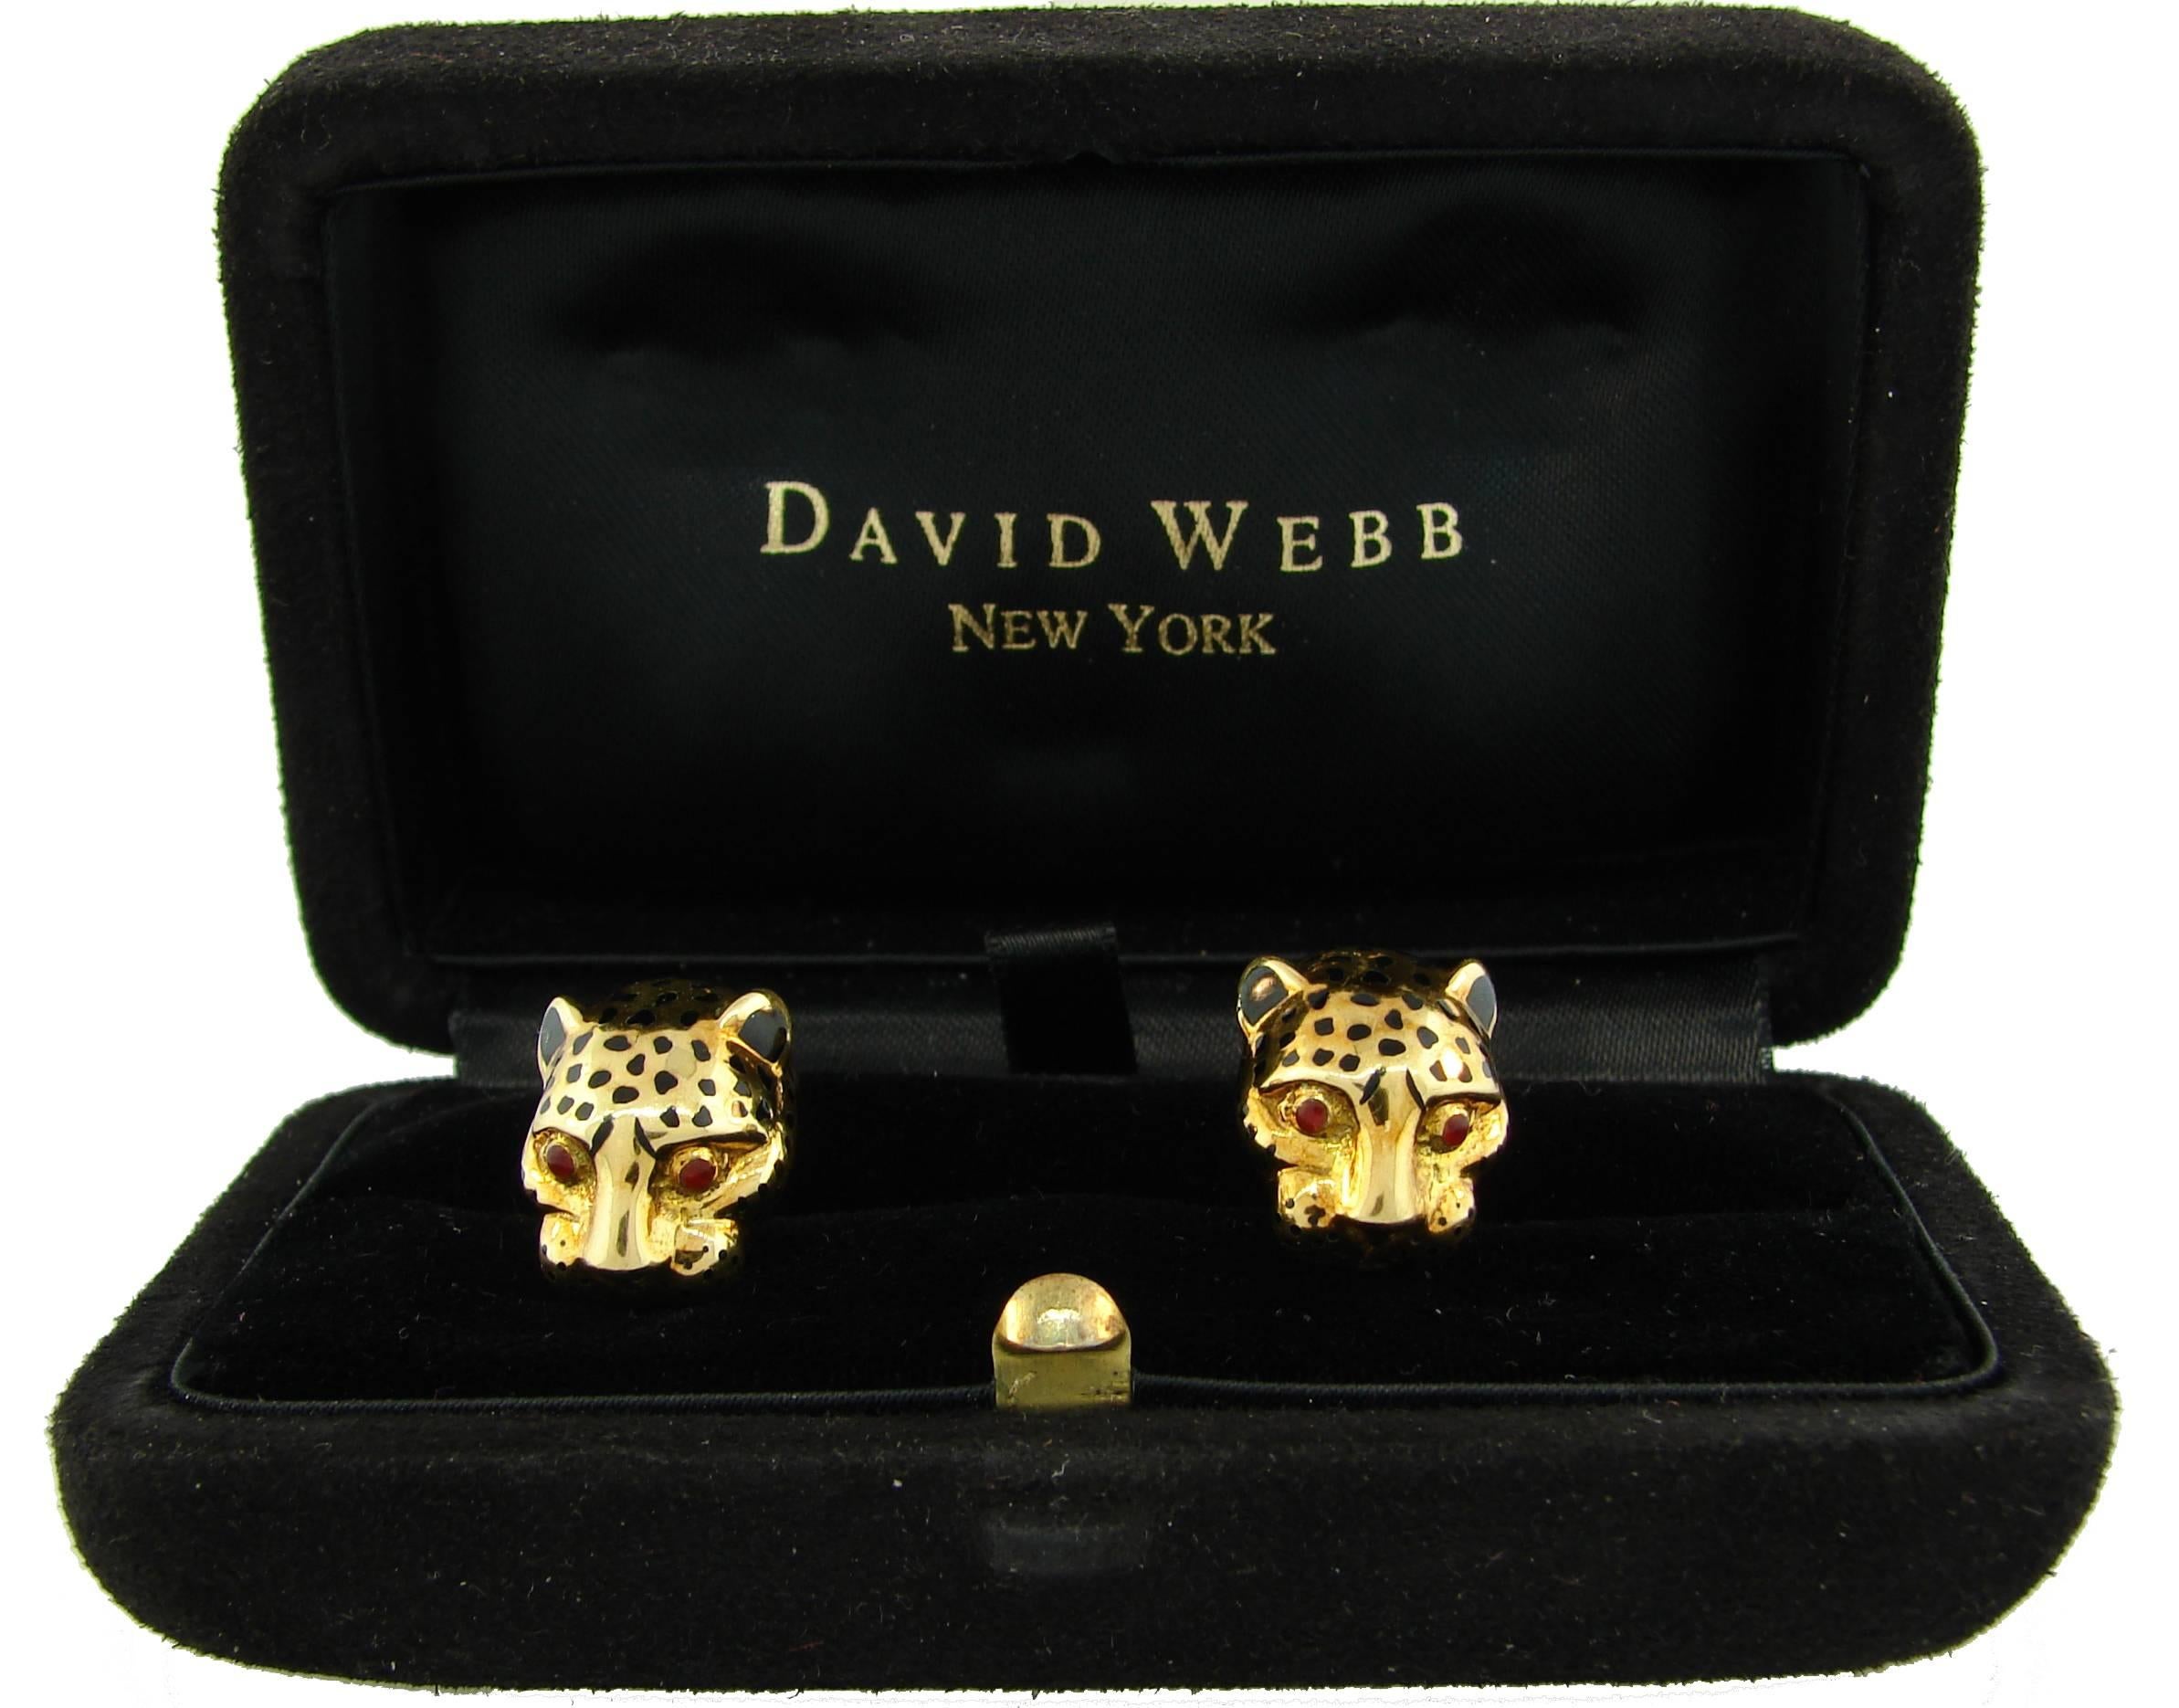 Cute and fun panther cufflinks created by David Webb in the 1980's. Elegant and stylish, the cufflinks are a great addition to your jewelry and accessories collection. 
Made of 18k (stamped) yellow gold and black and red enamel.
The panthers' heads